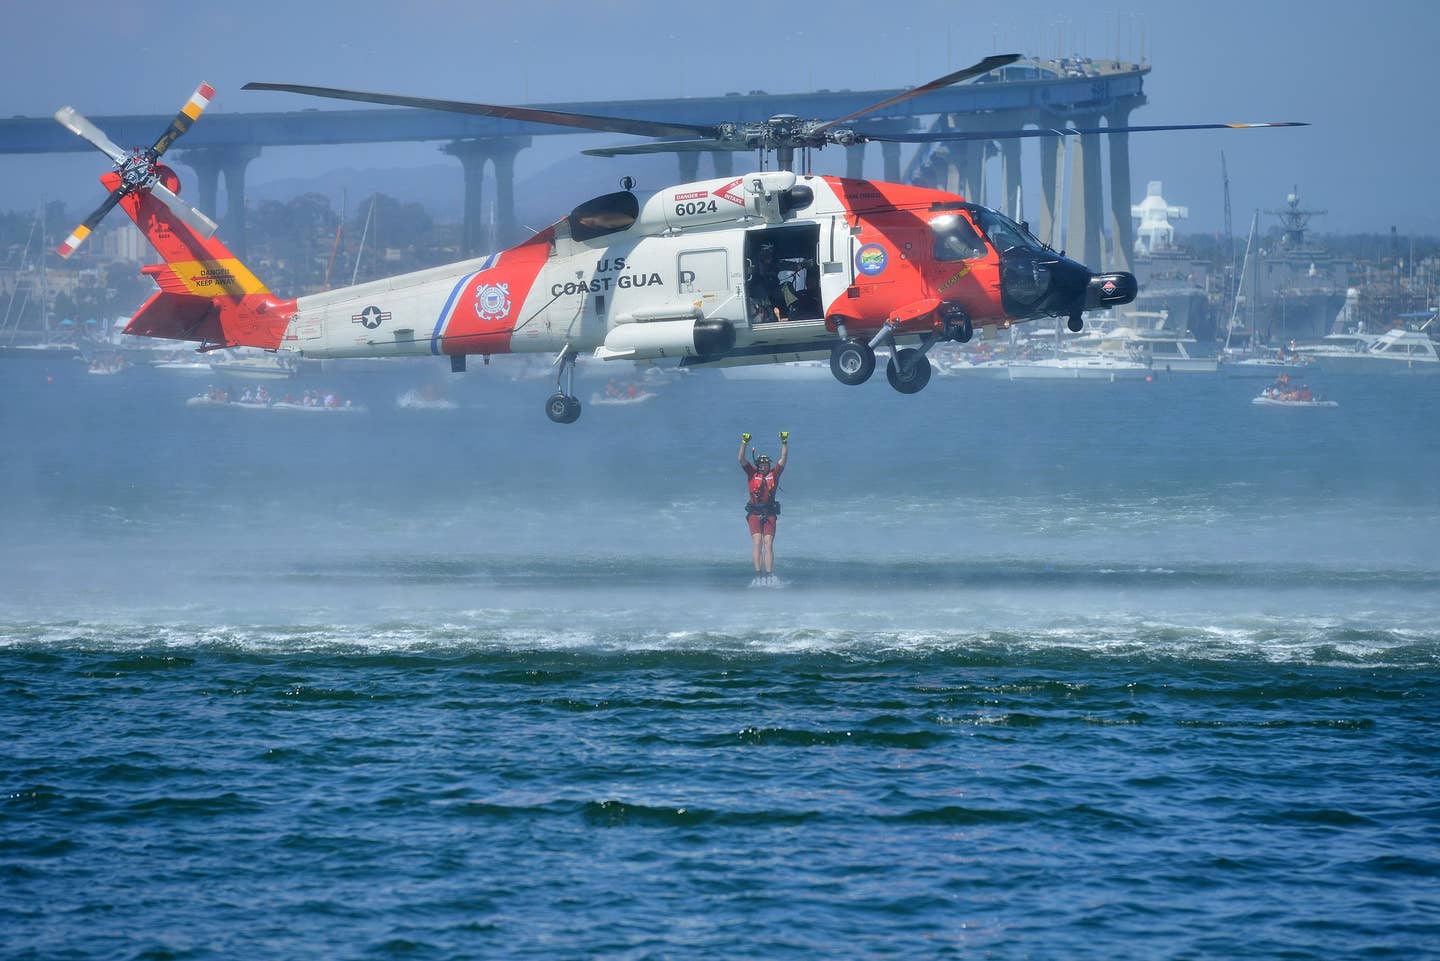 Petty Officer 2nd Class Ryan Pierce, an aviation survival technician at Coast Guard Sector San Diego, deploys from an MH-60 Jayhawk helicopter during a search and rescue demonstration in Glorietta Bay, in Coronado, Calif., July 4, 2015. During the demonstration, Pierce and the Jayhawk crew simulated various rescue techniques during search and rescue cases. (U.S. Coast Guard photo by Petty Officer 1st Class Rob Simpson)